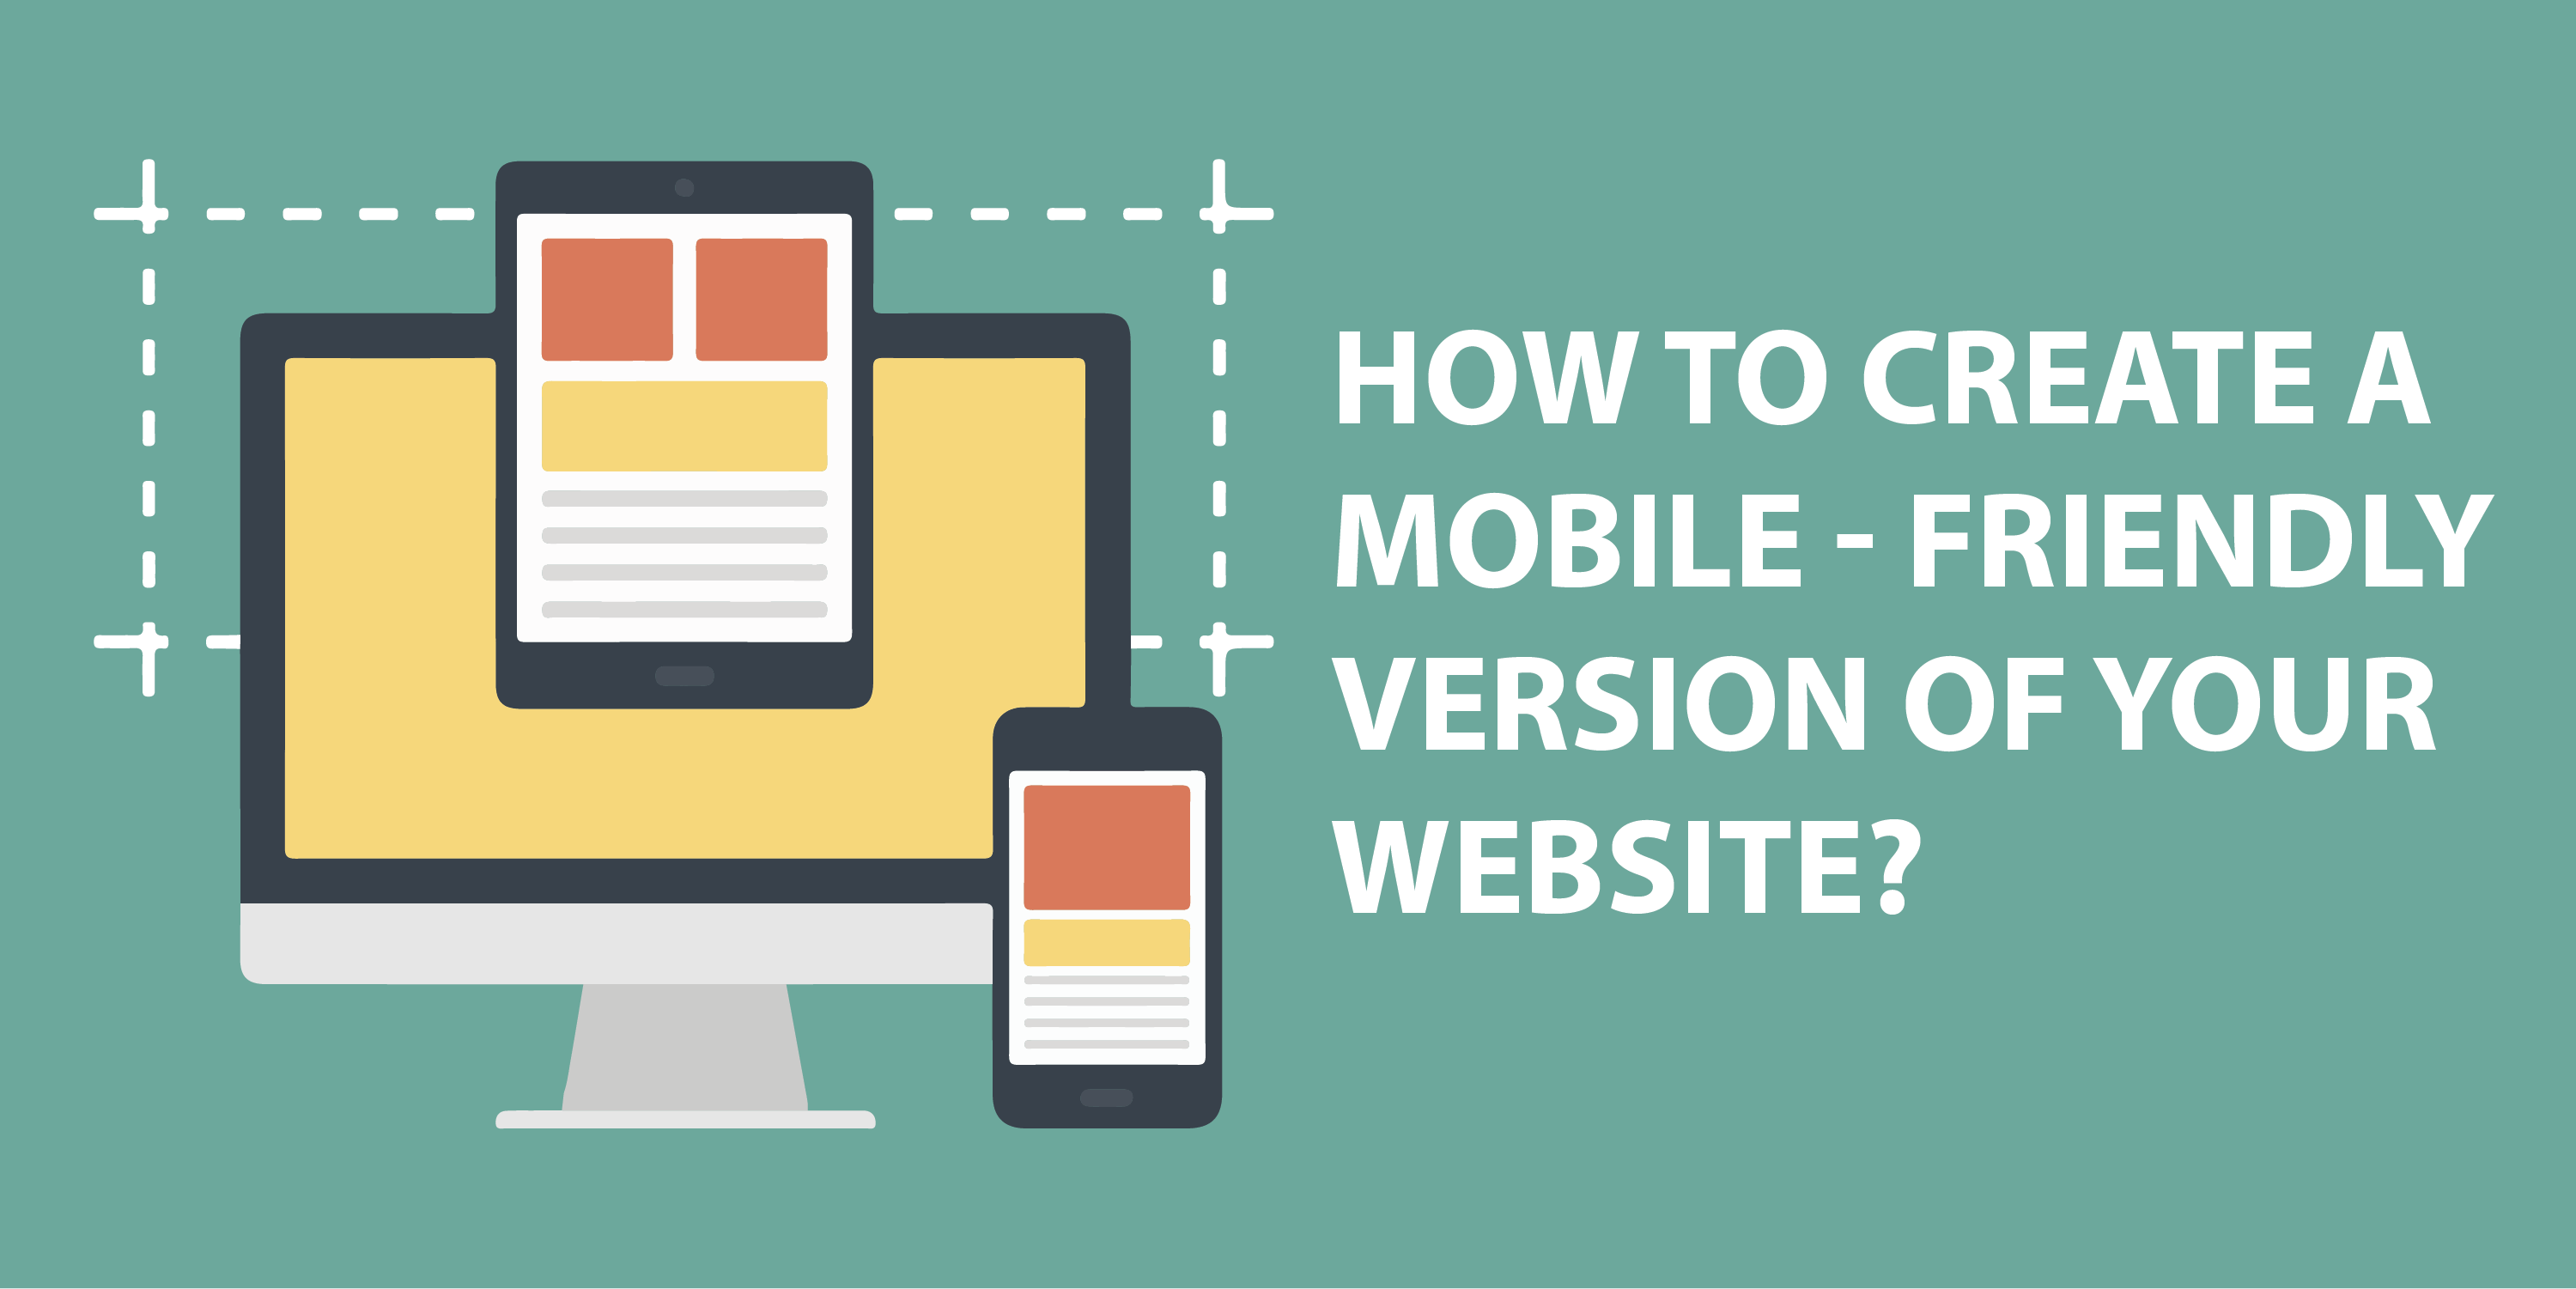 HOW TO CREATE A MOBILE-FRIENDLY VERSION OF YOUR WEBSITE